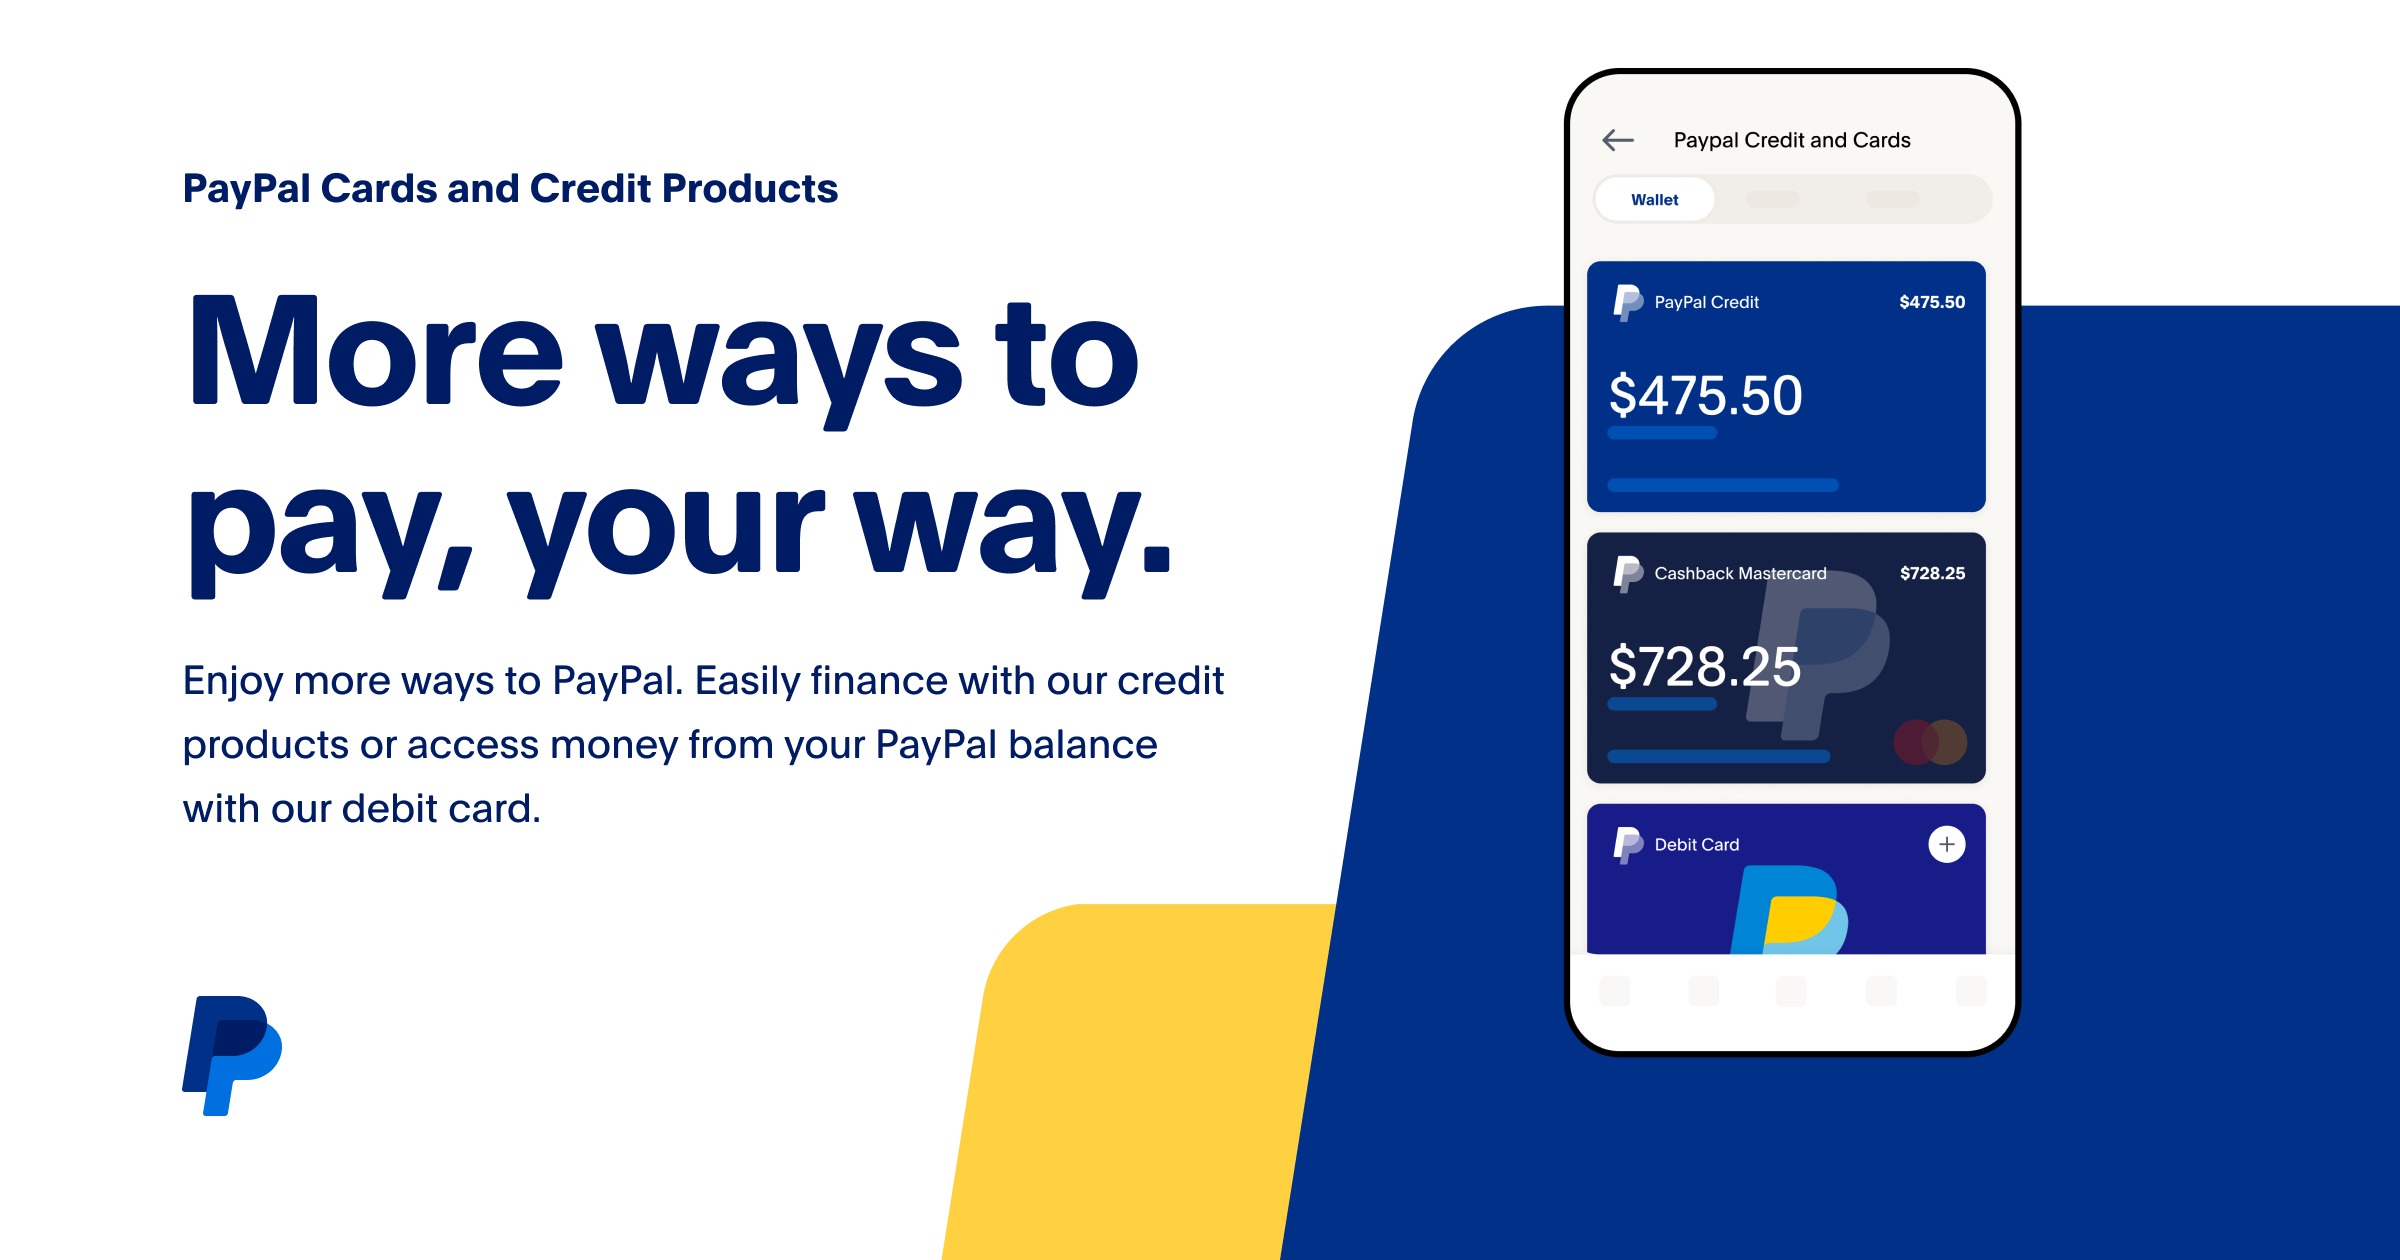 Can’t use PayPal balance online - PayPal Community